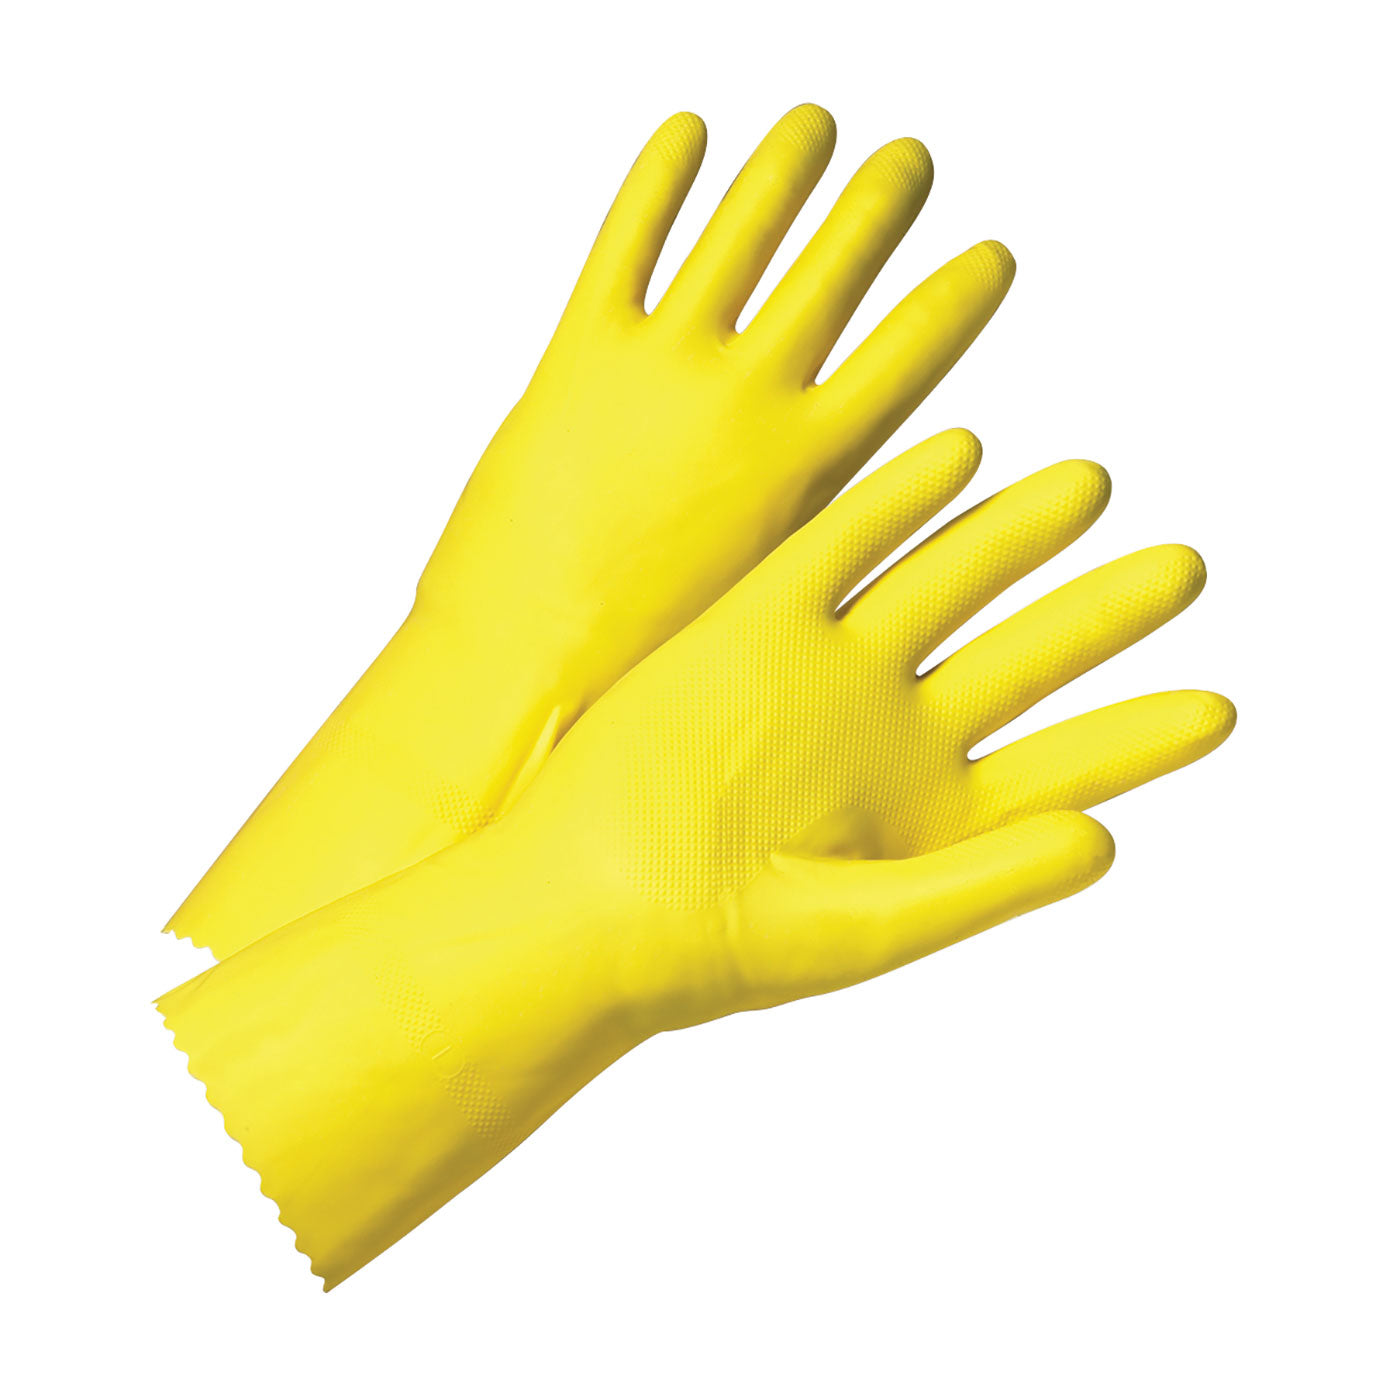 Rubber Gloves - Small (By Dz)